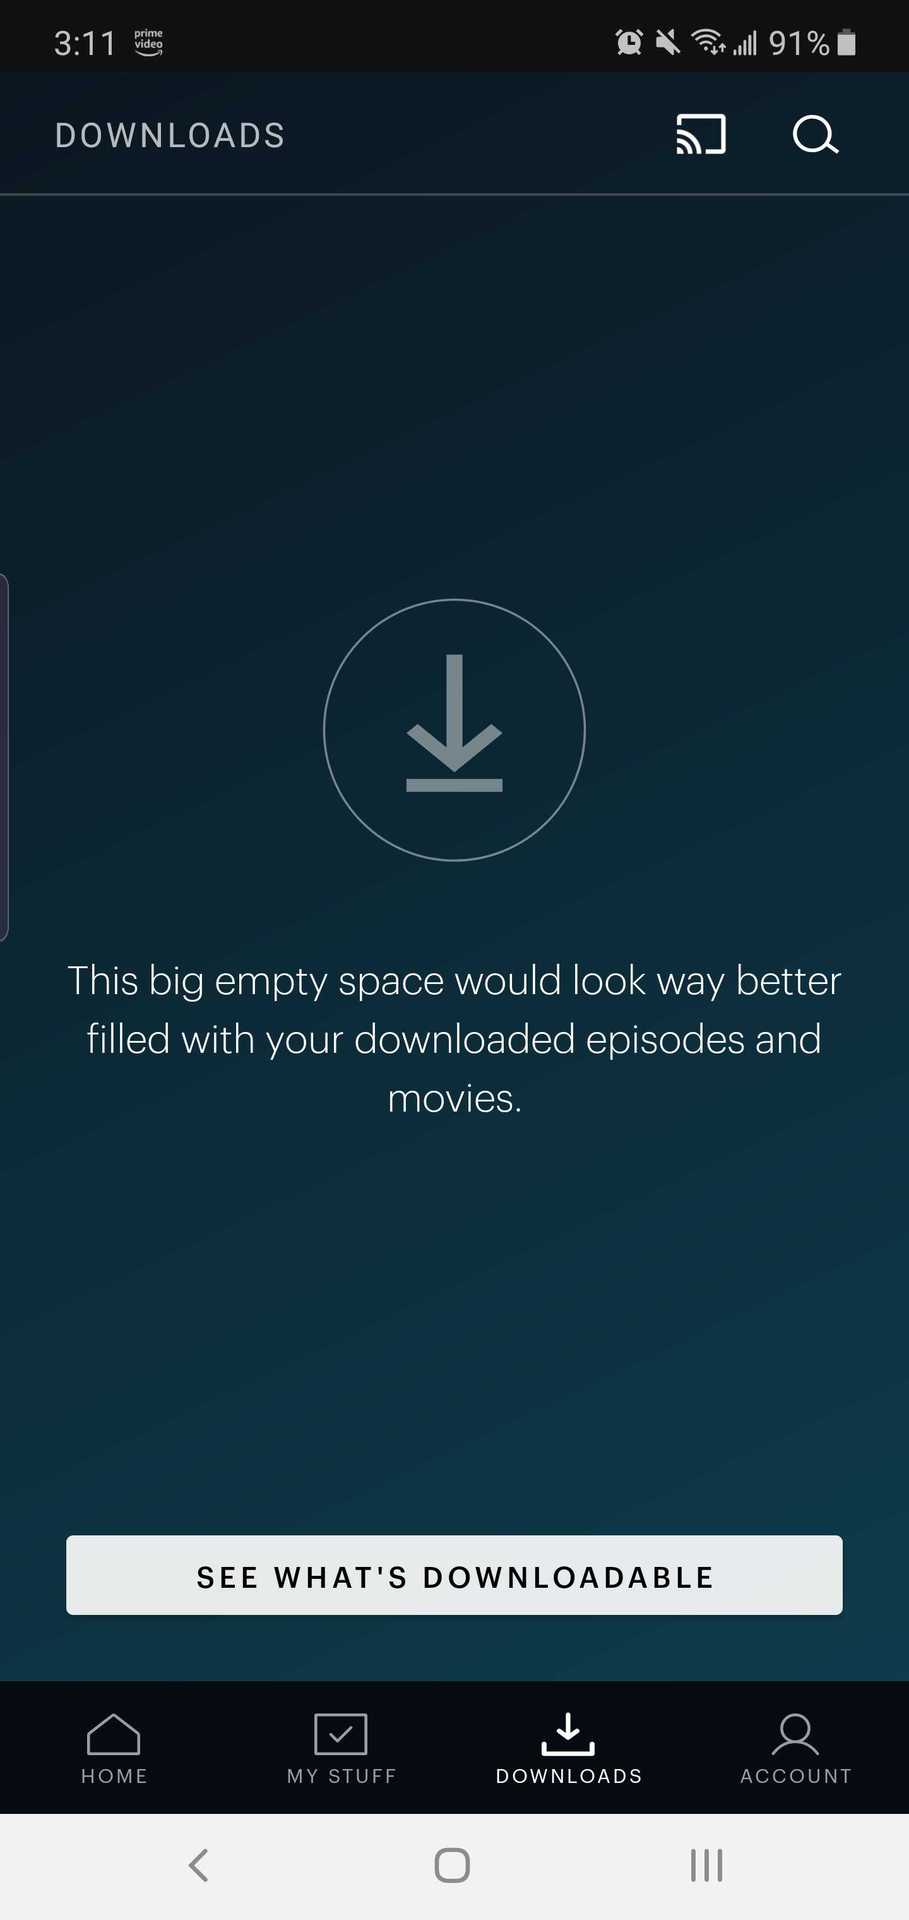 Watch Hulu videos offline on Android Downloads Tab